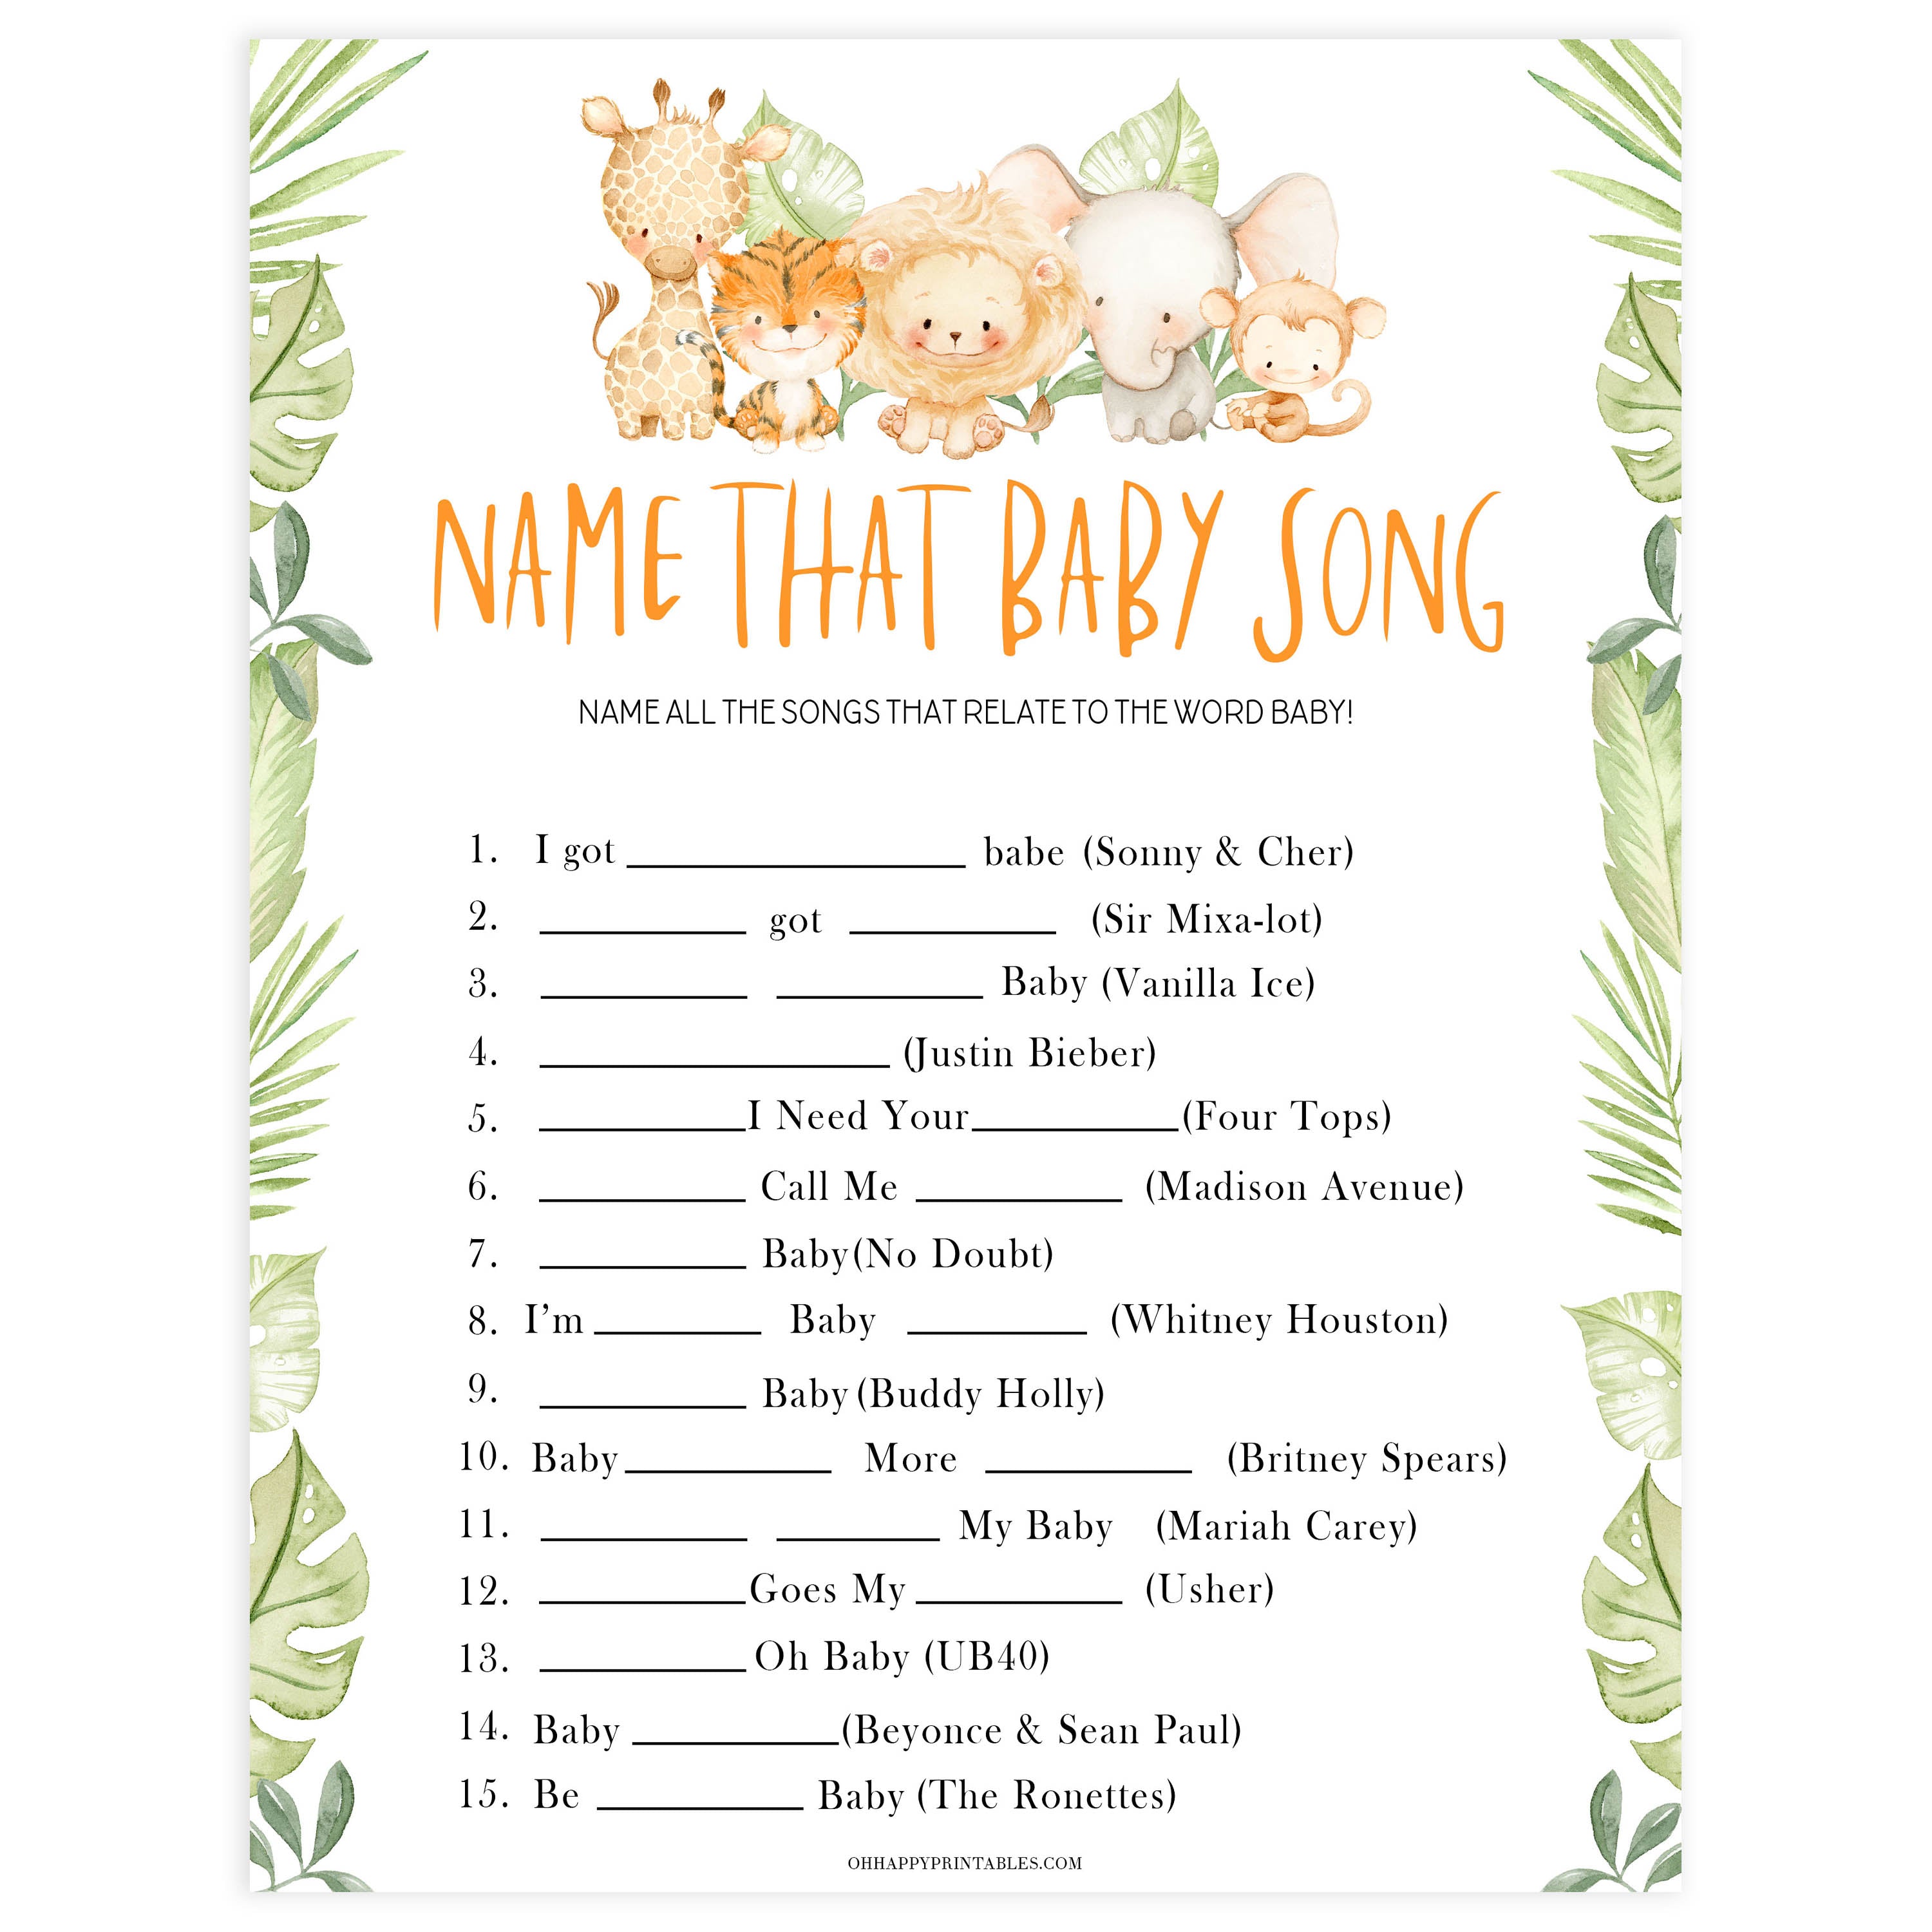 name that baby song game, Printable baby shower games, safari animals baby games, baby shower games, fun baby shower ideas, top baby shower ideas, safari animals baby shower, baby shower games, fun baby shower ideas